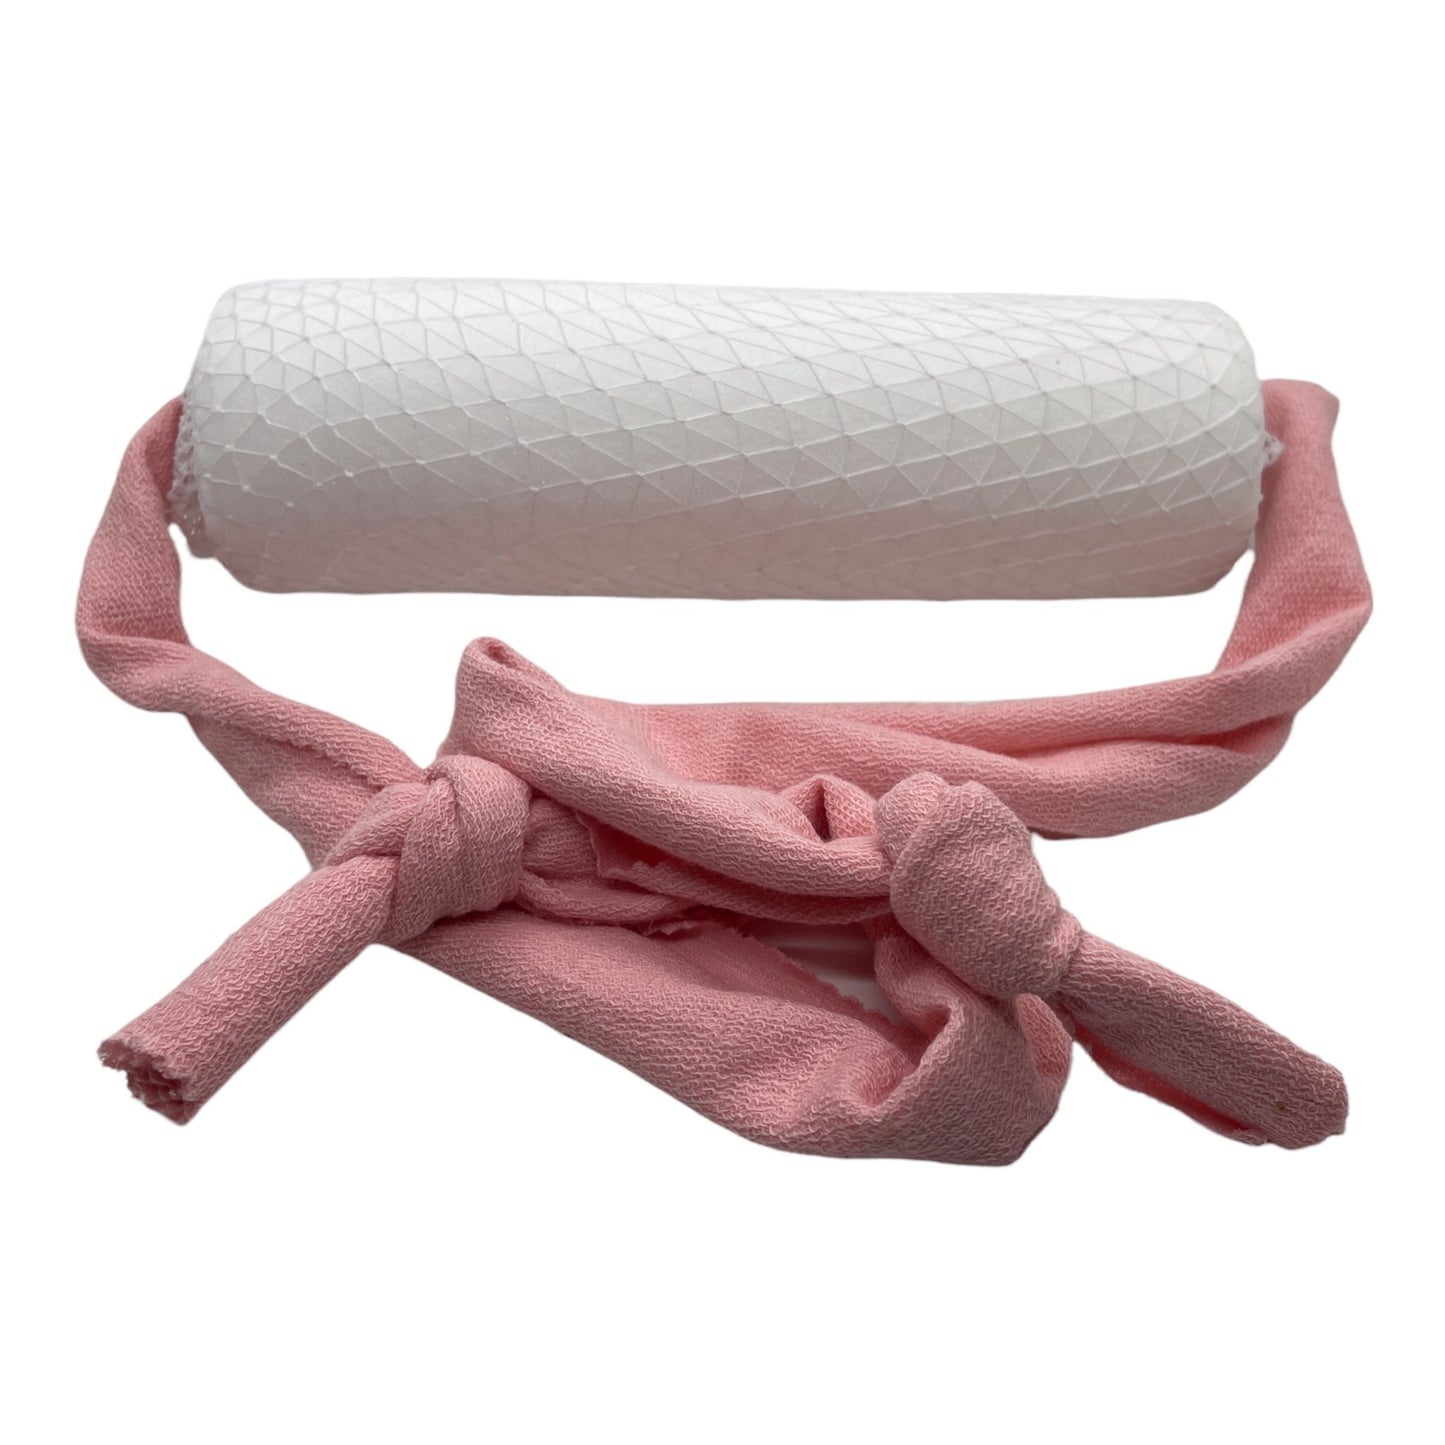 Basin Bliss Hair Salon Neck Rest Pillow- Personal take along support for the hair salon (Pink) - Basin Bliss